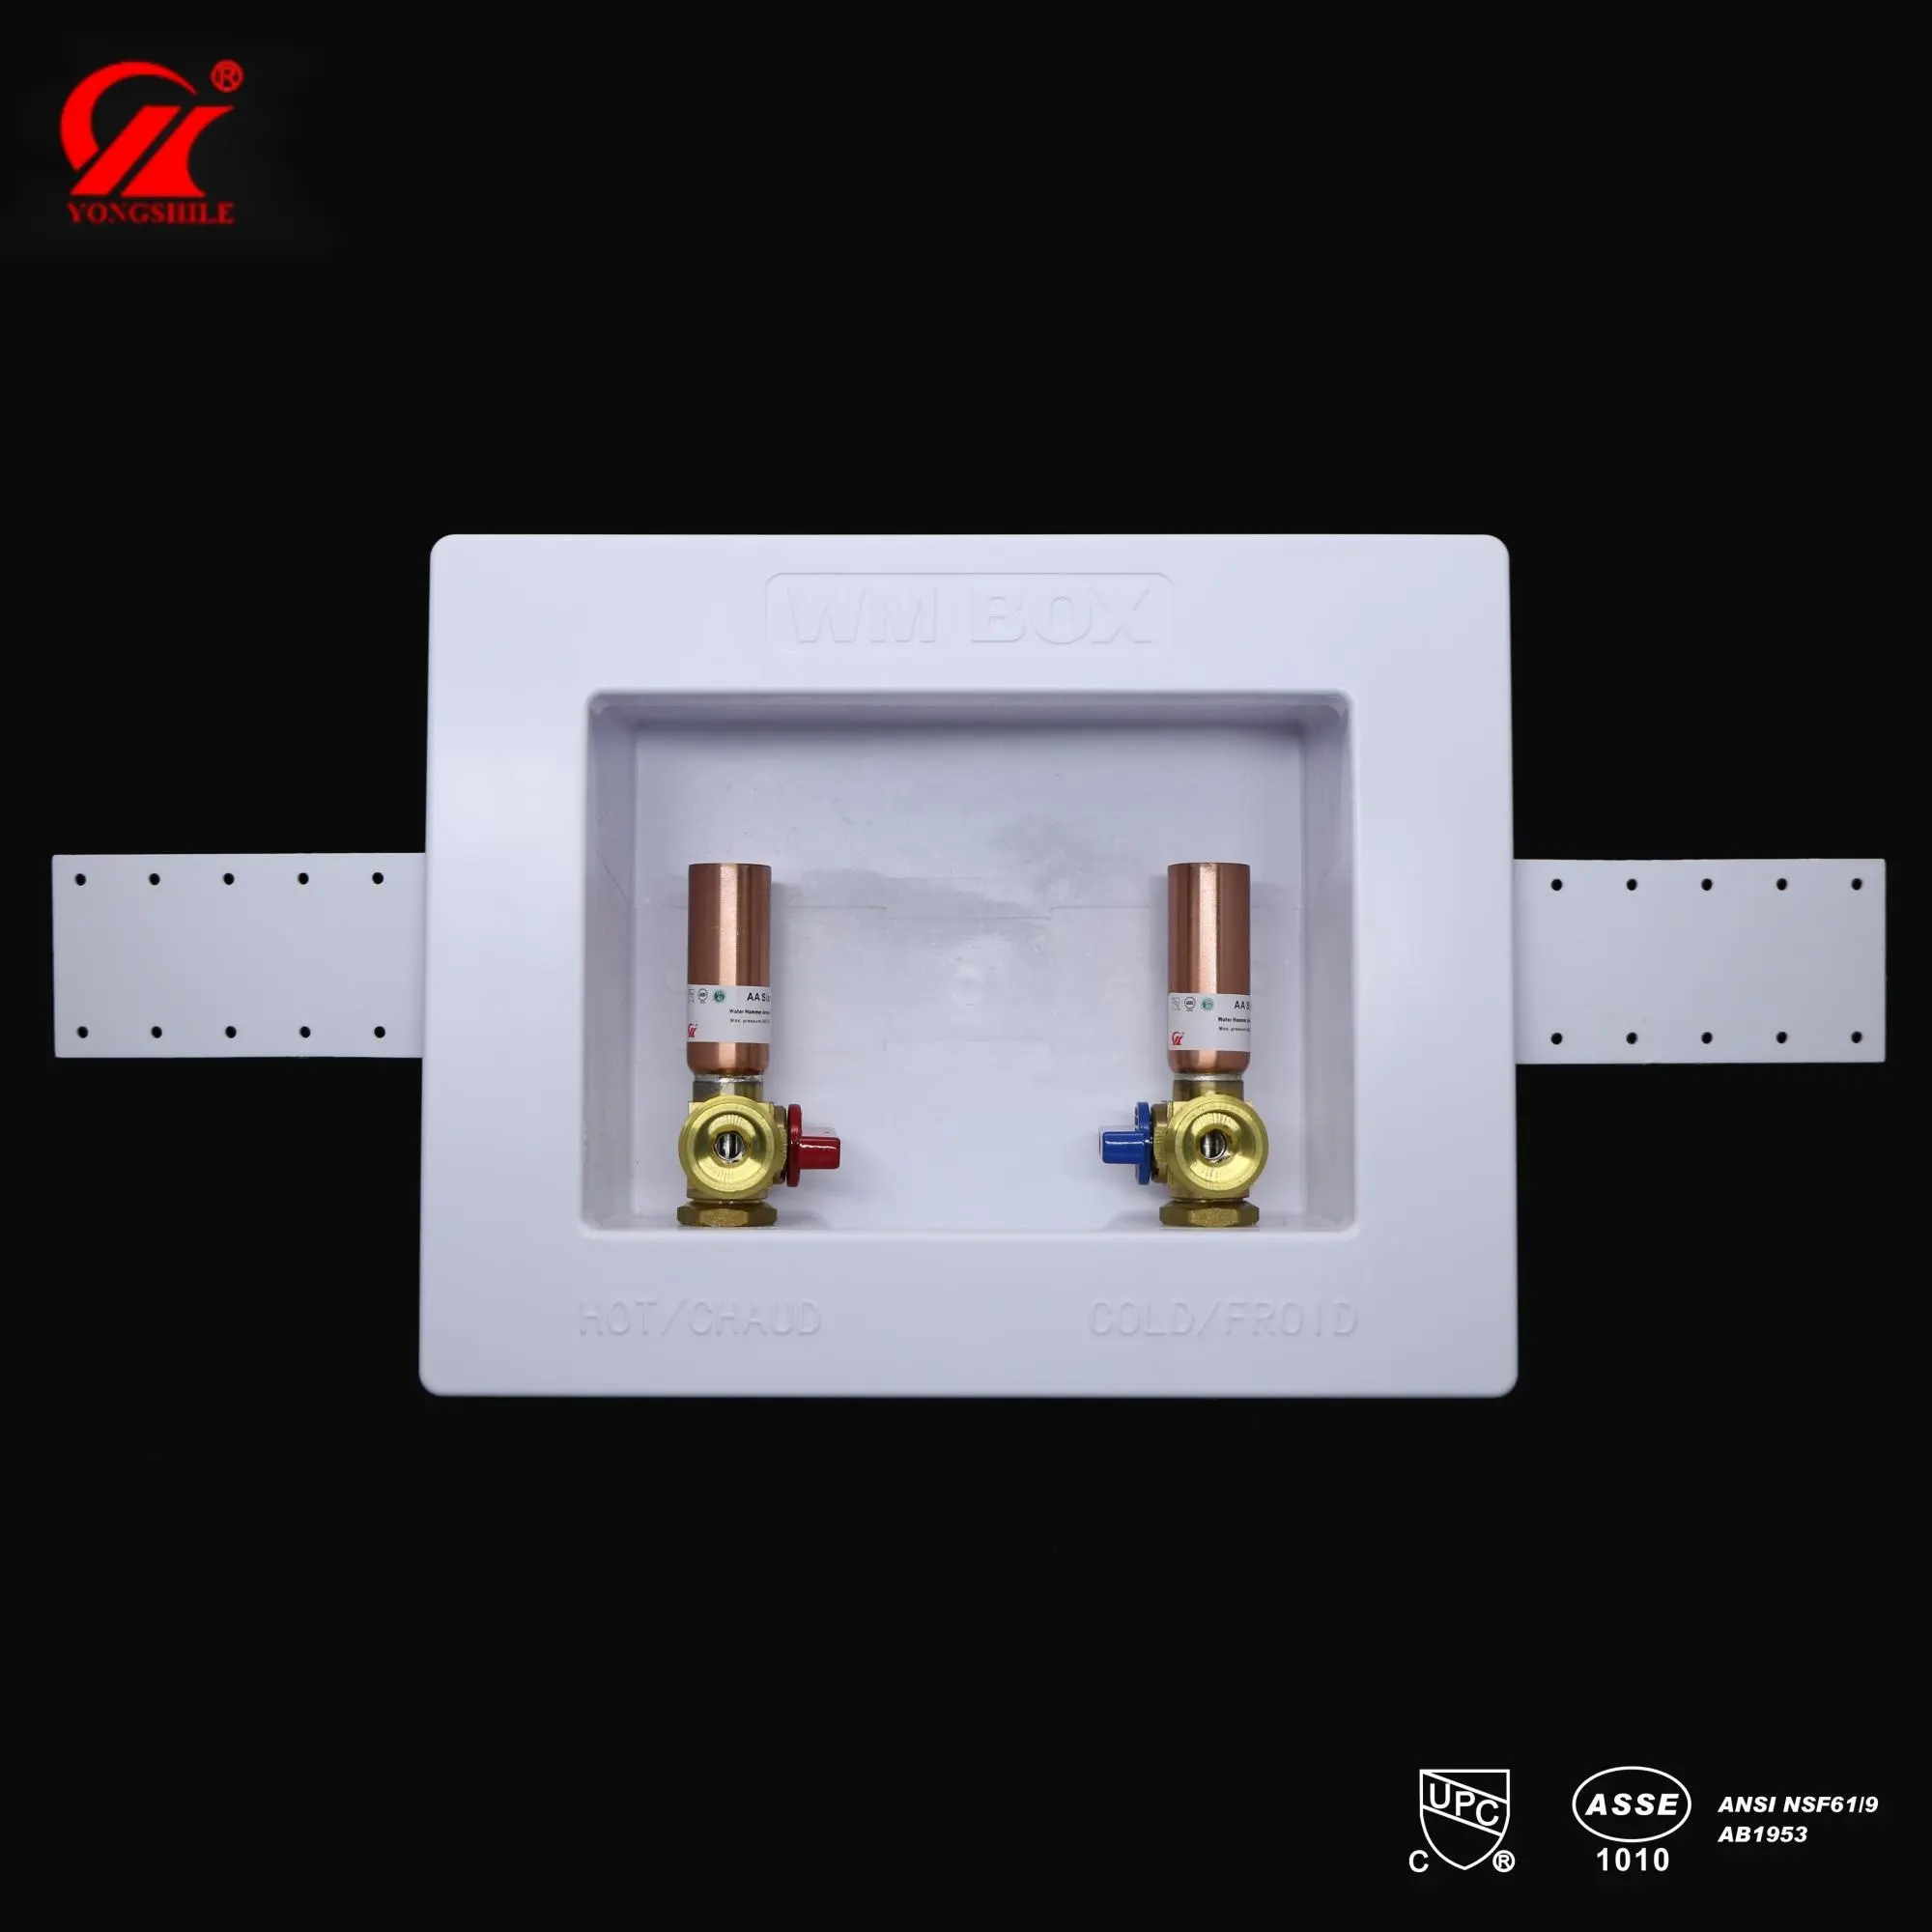 High Quality OEM Washing or Laundry Machine Outlet Box with Ball Valves 3 Quarters inch MHT Installed